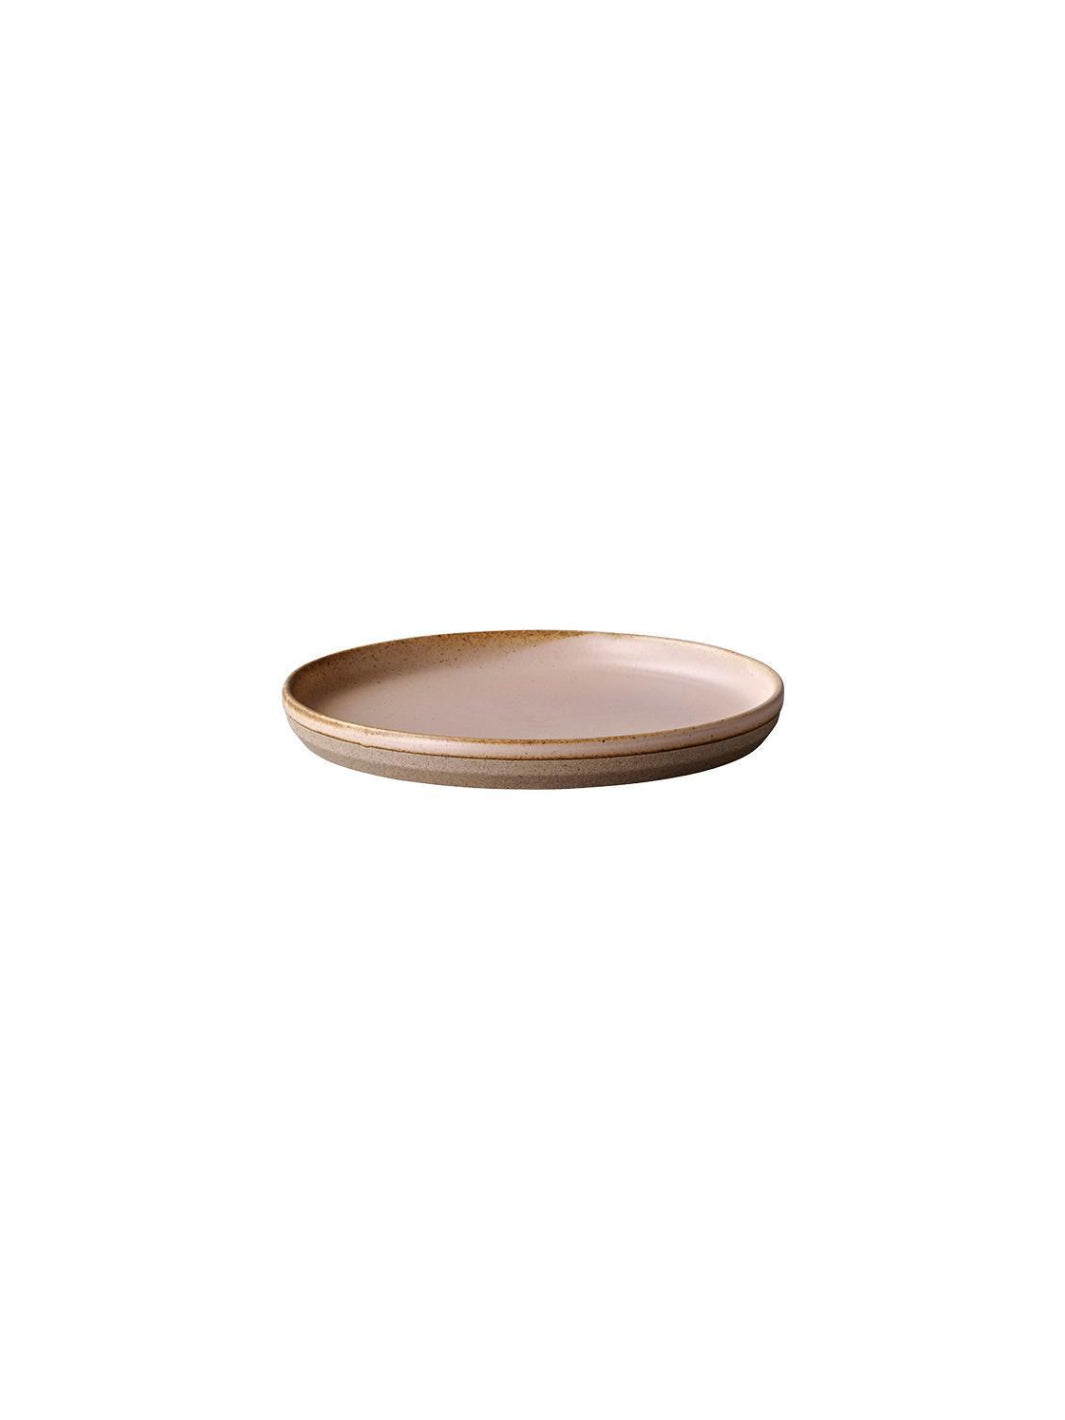 KINTO CERAMIC LAB Plate (160mm/6in) (3-Pack)